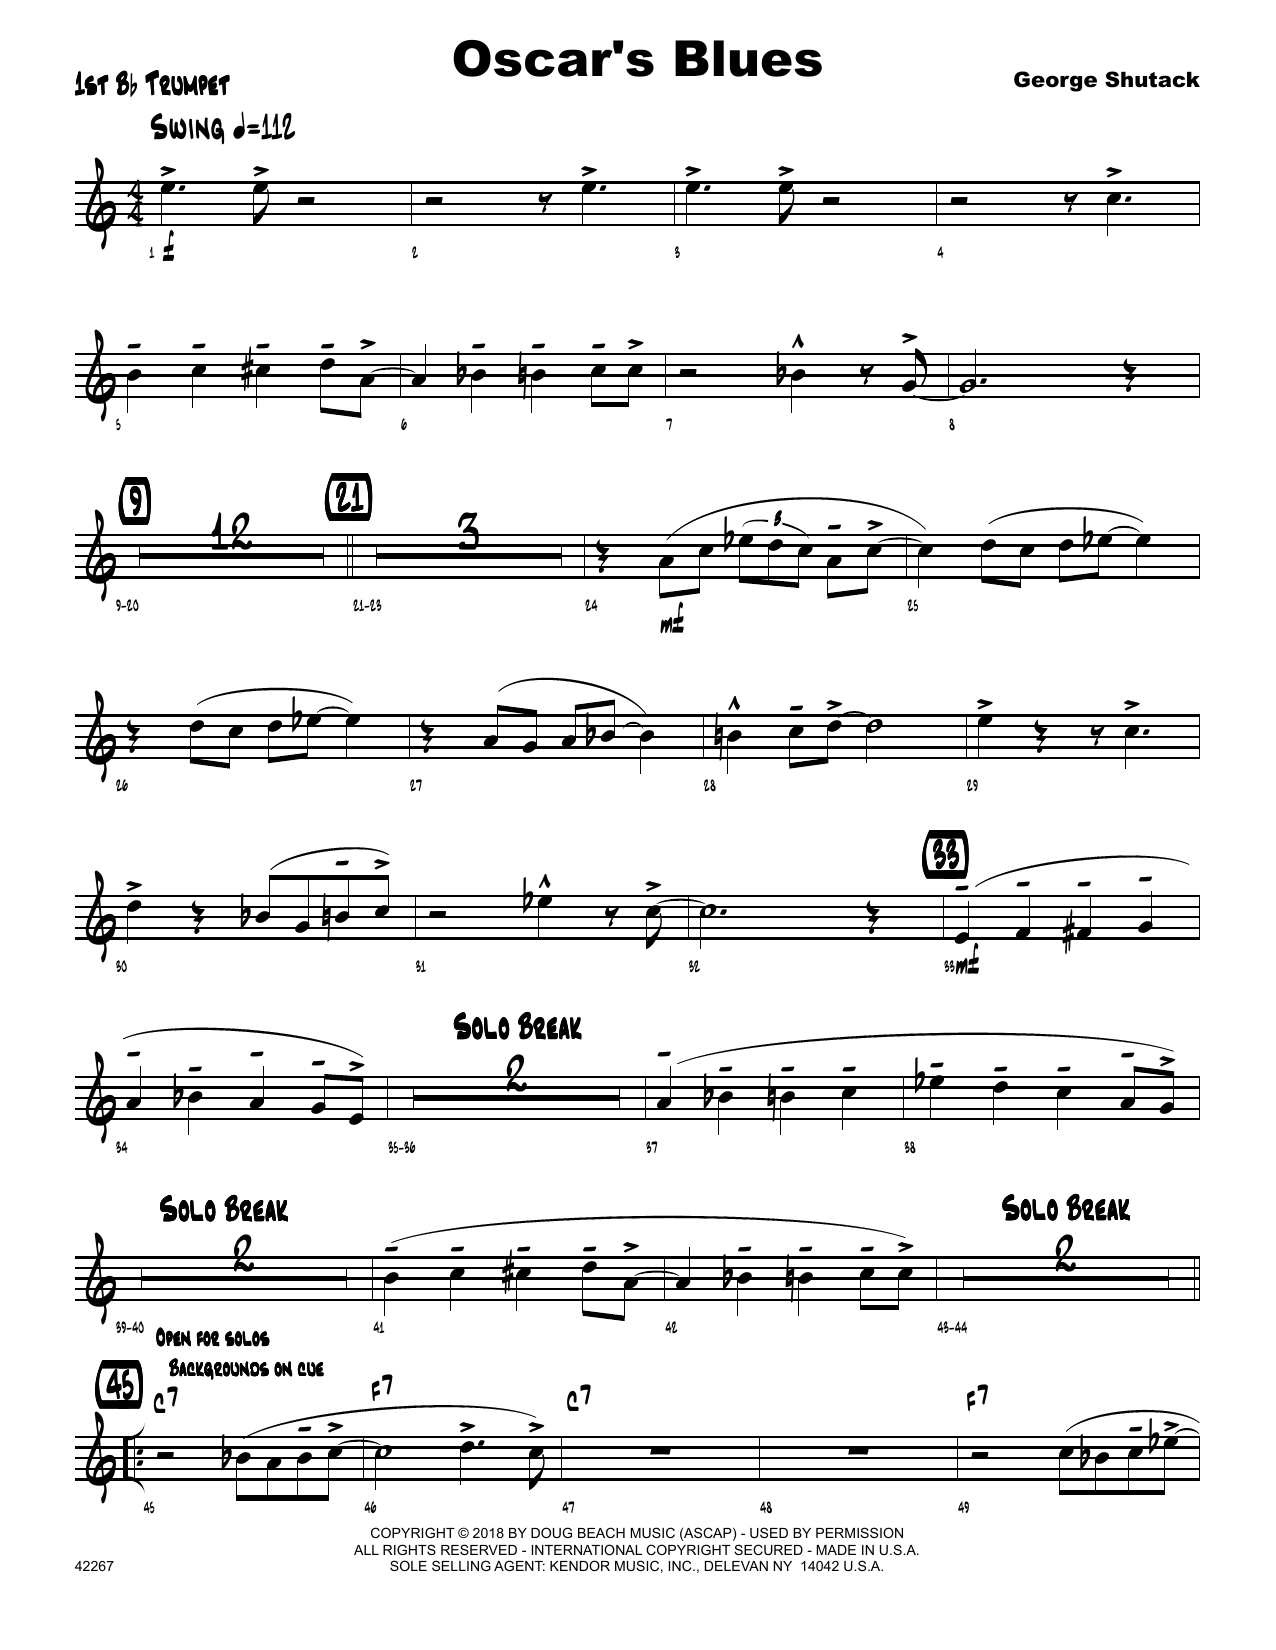 George Shutack Oscar's Blues - 1st Bb Trumpet sheet music preview music notes and score for Jazz Ensemble including 2 page(s)